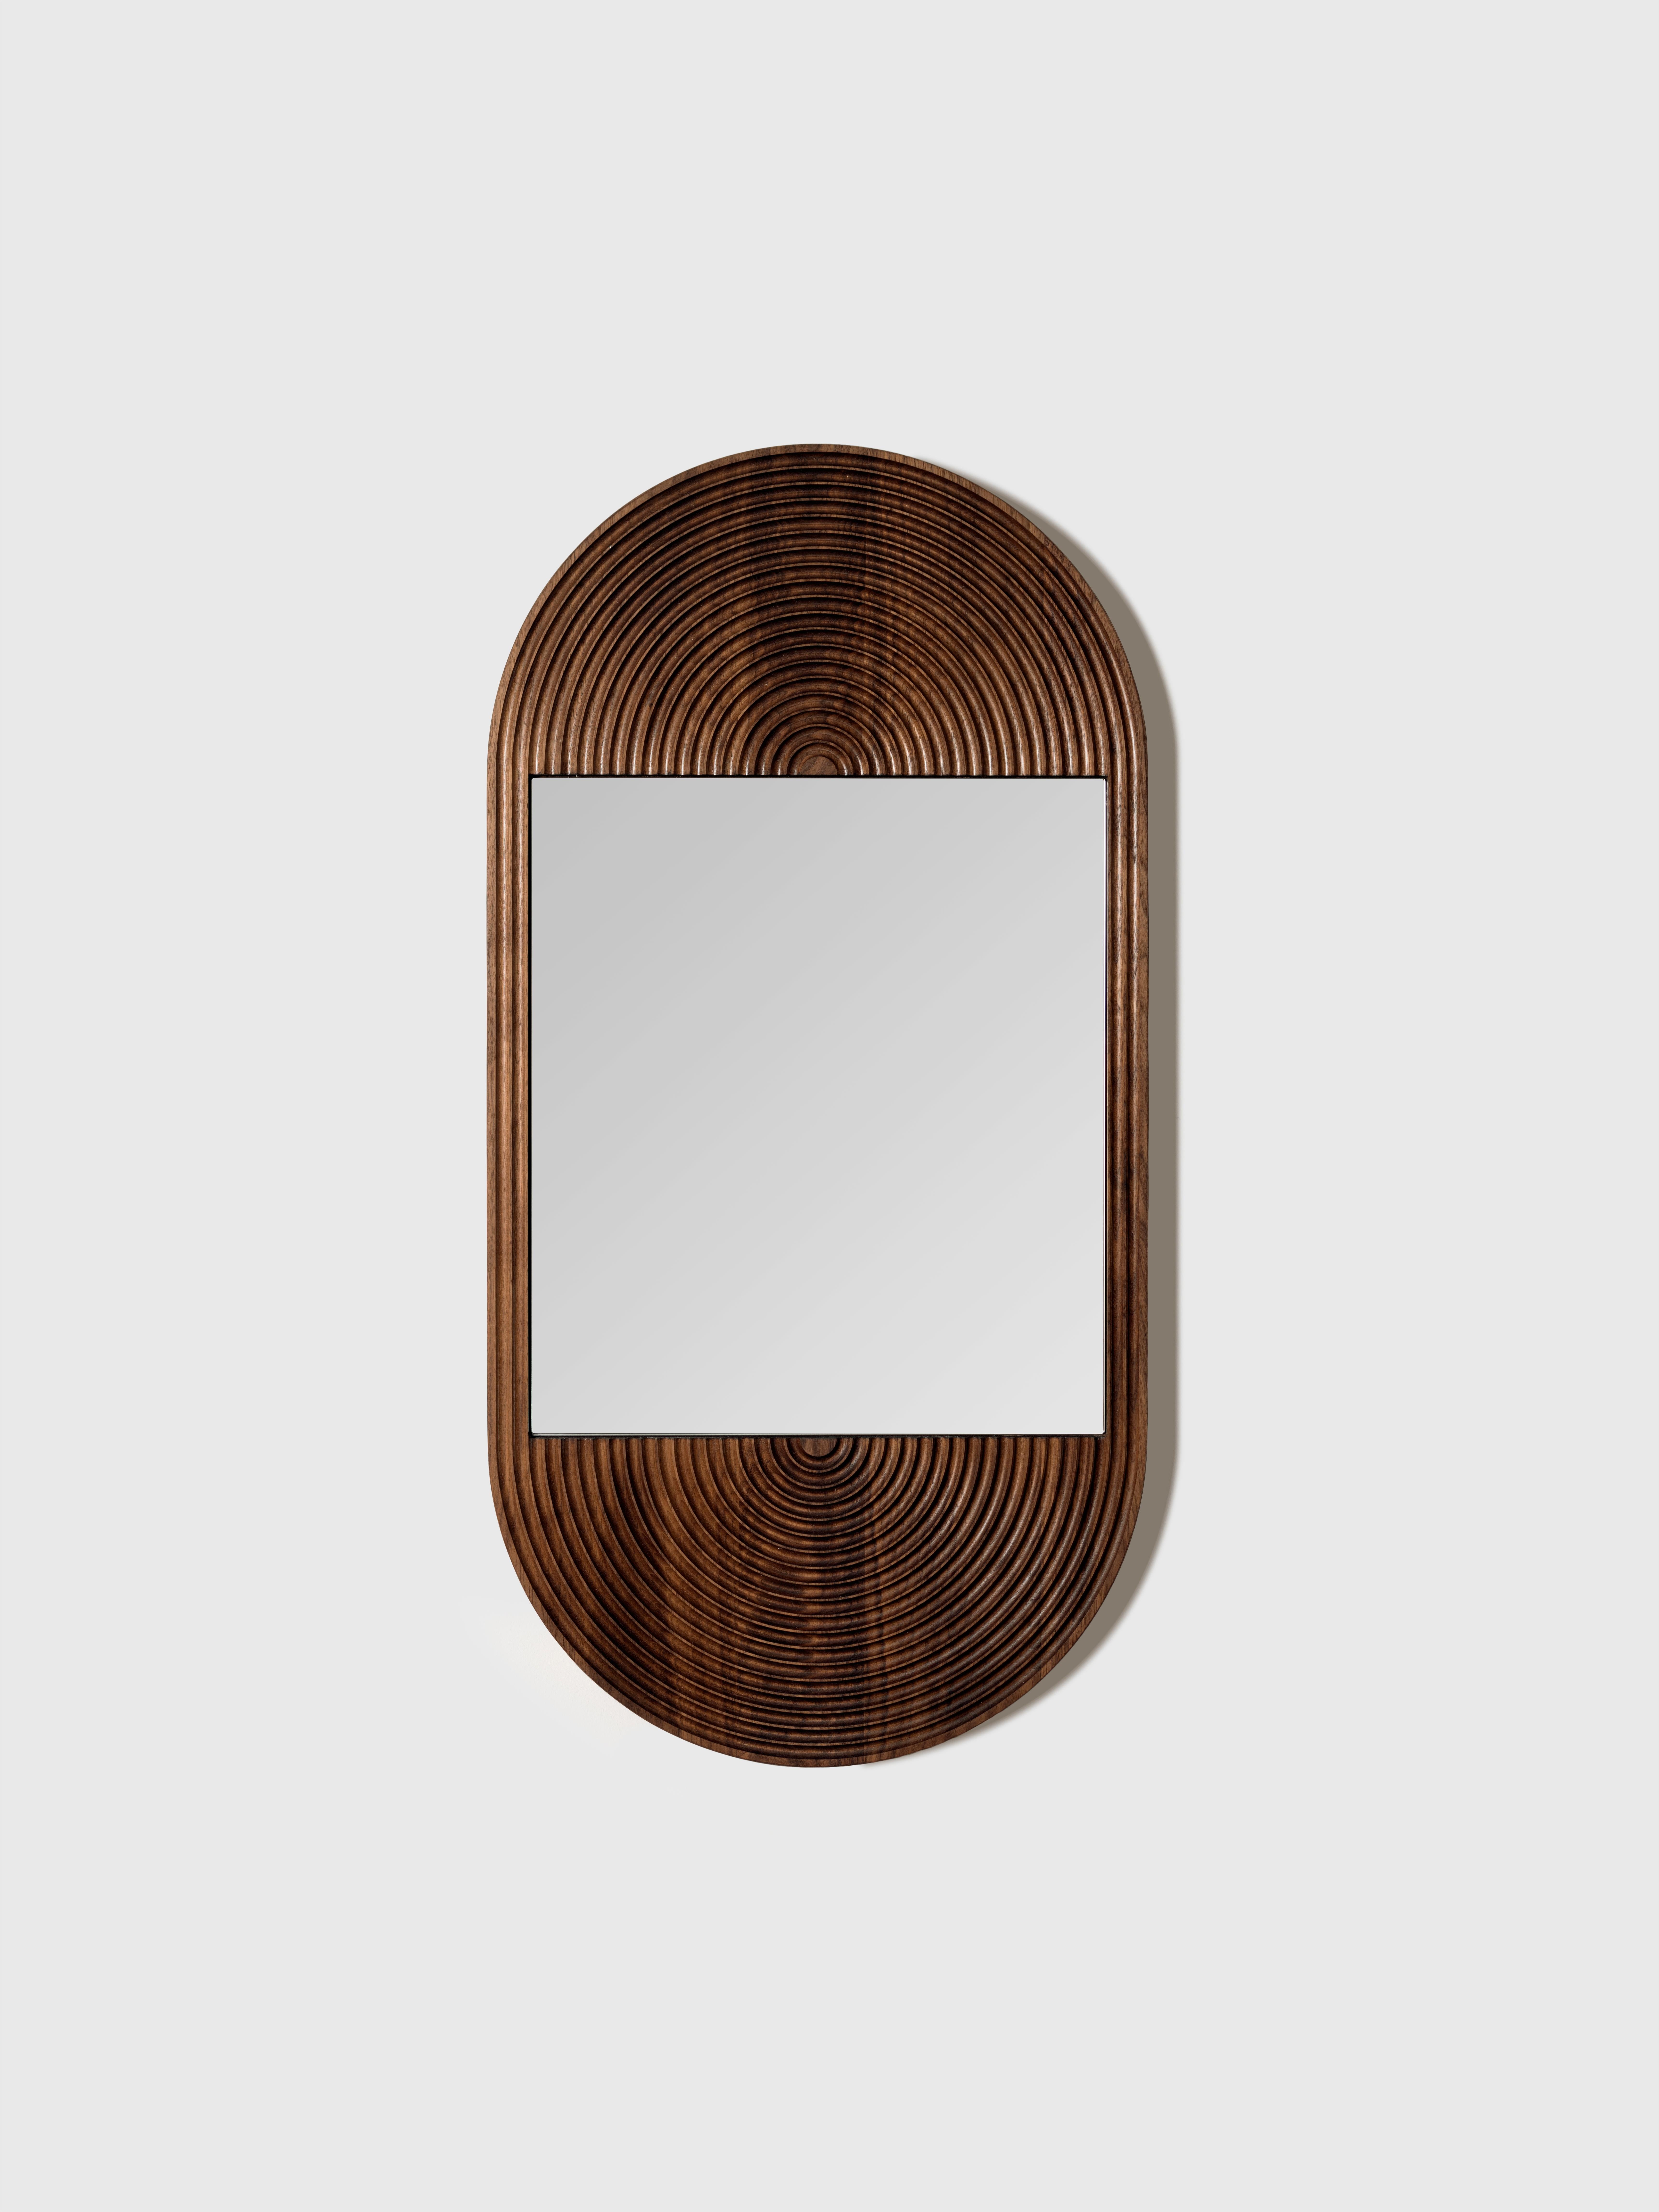 Concentric circles carved into walnut wood creates a stunning sculptural pattern both modern and reminiscent of glamorous 1970s decor. The rounded carving creates beautiful wave-like patterning in the rich walnut grain. This captivating mirror